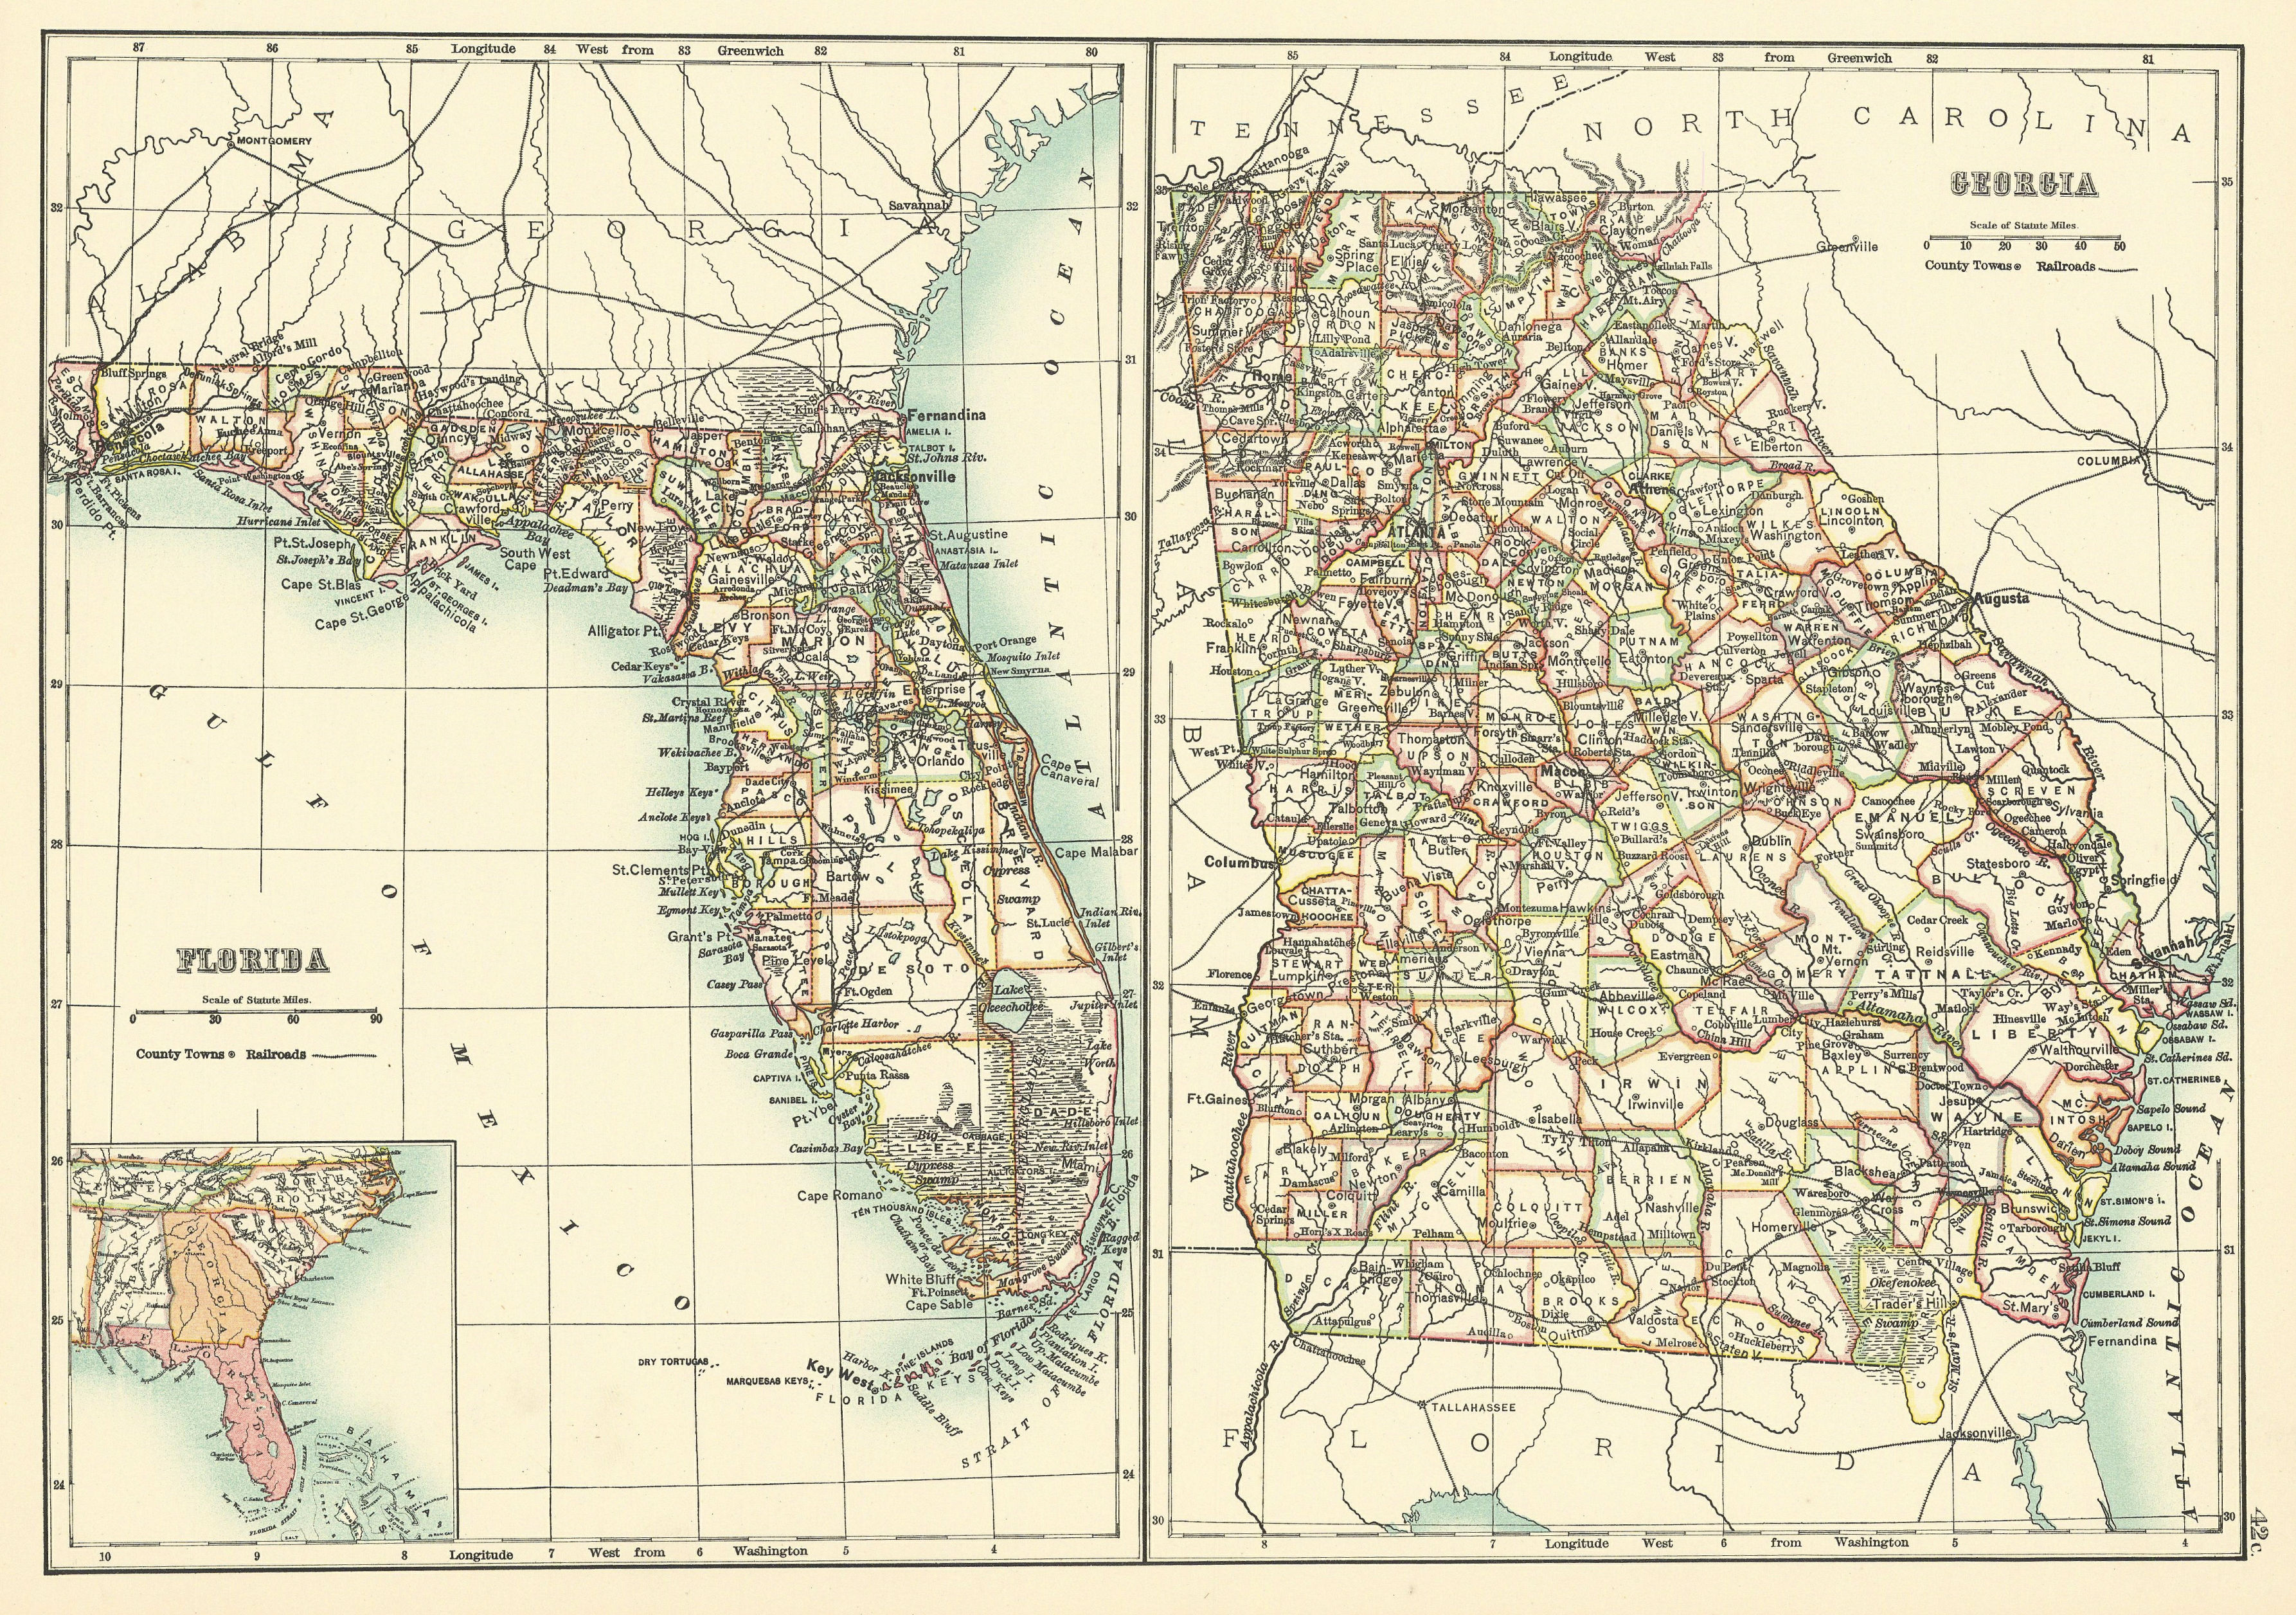 Georgia and Florida state maps showing counties. BARTHOLOMEW 1898 old